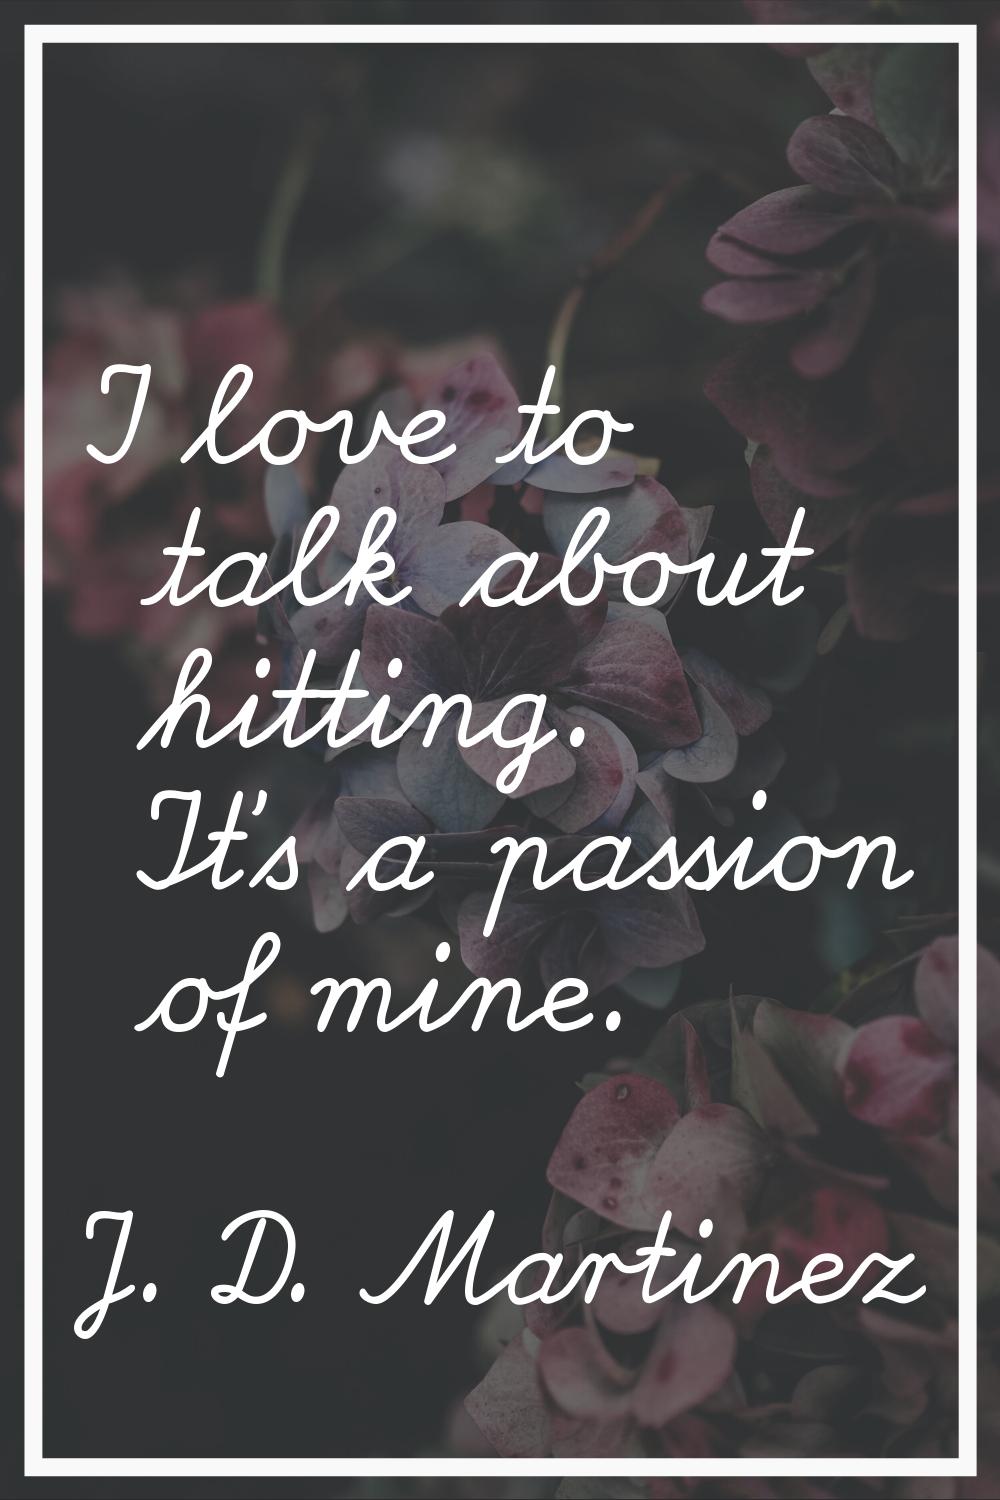 I love to talk about hitting. It's a passion of mine.